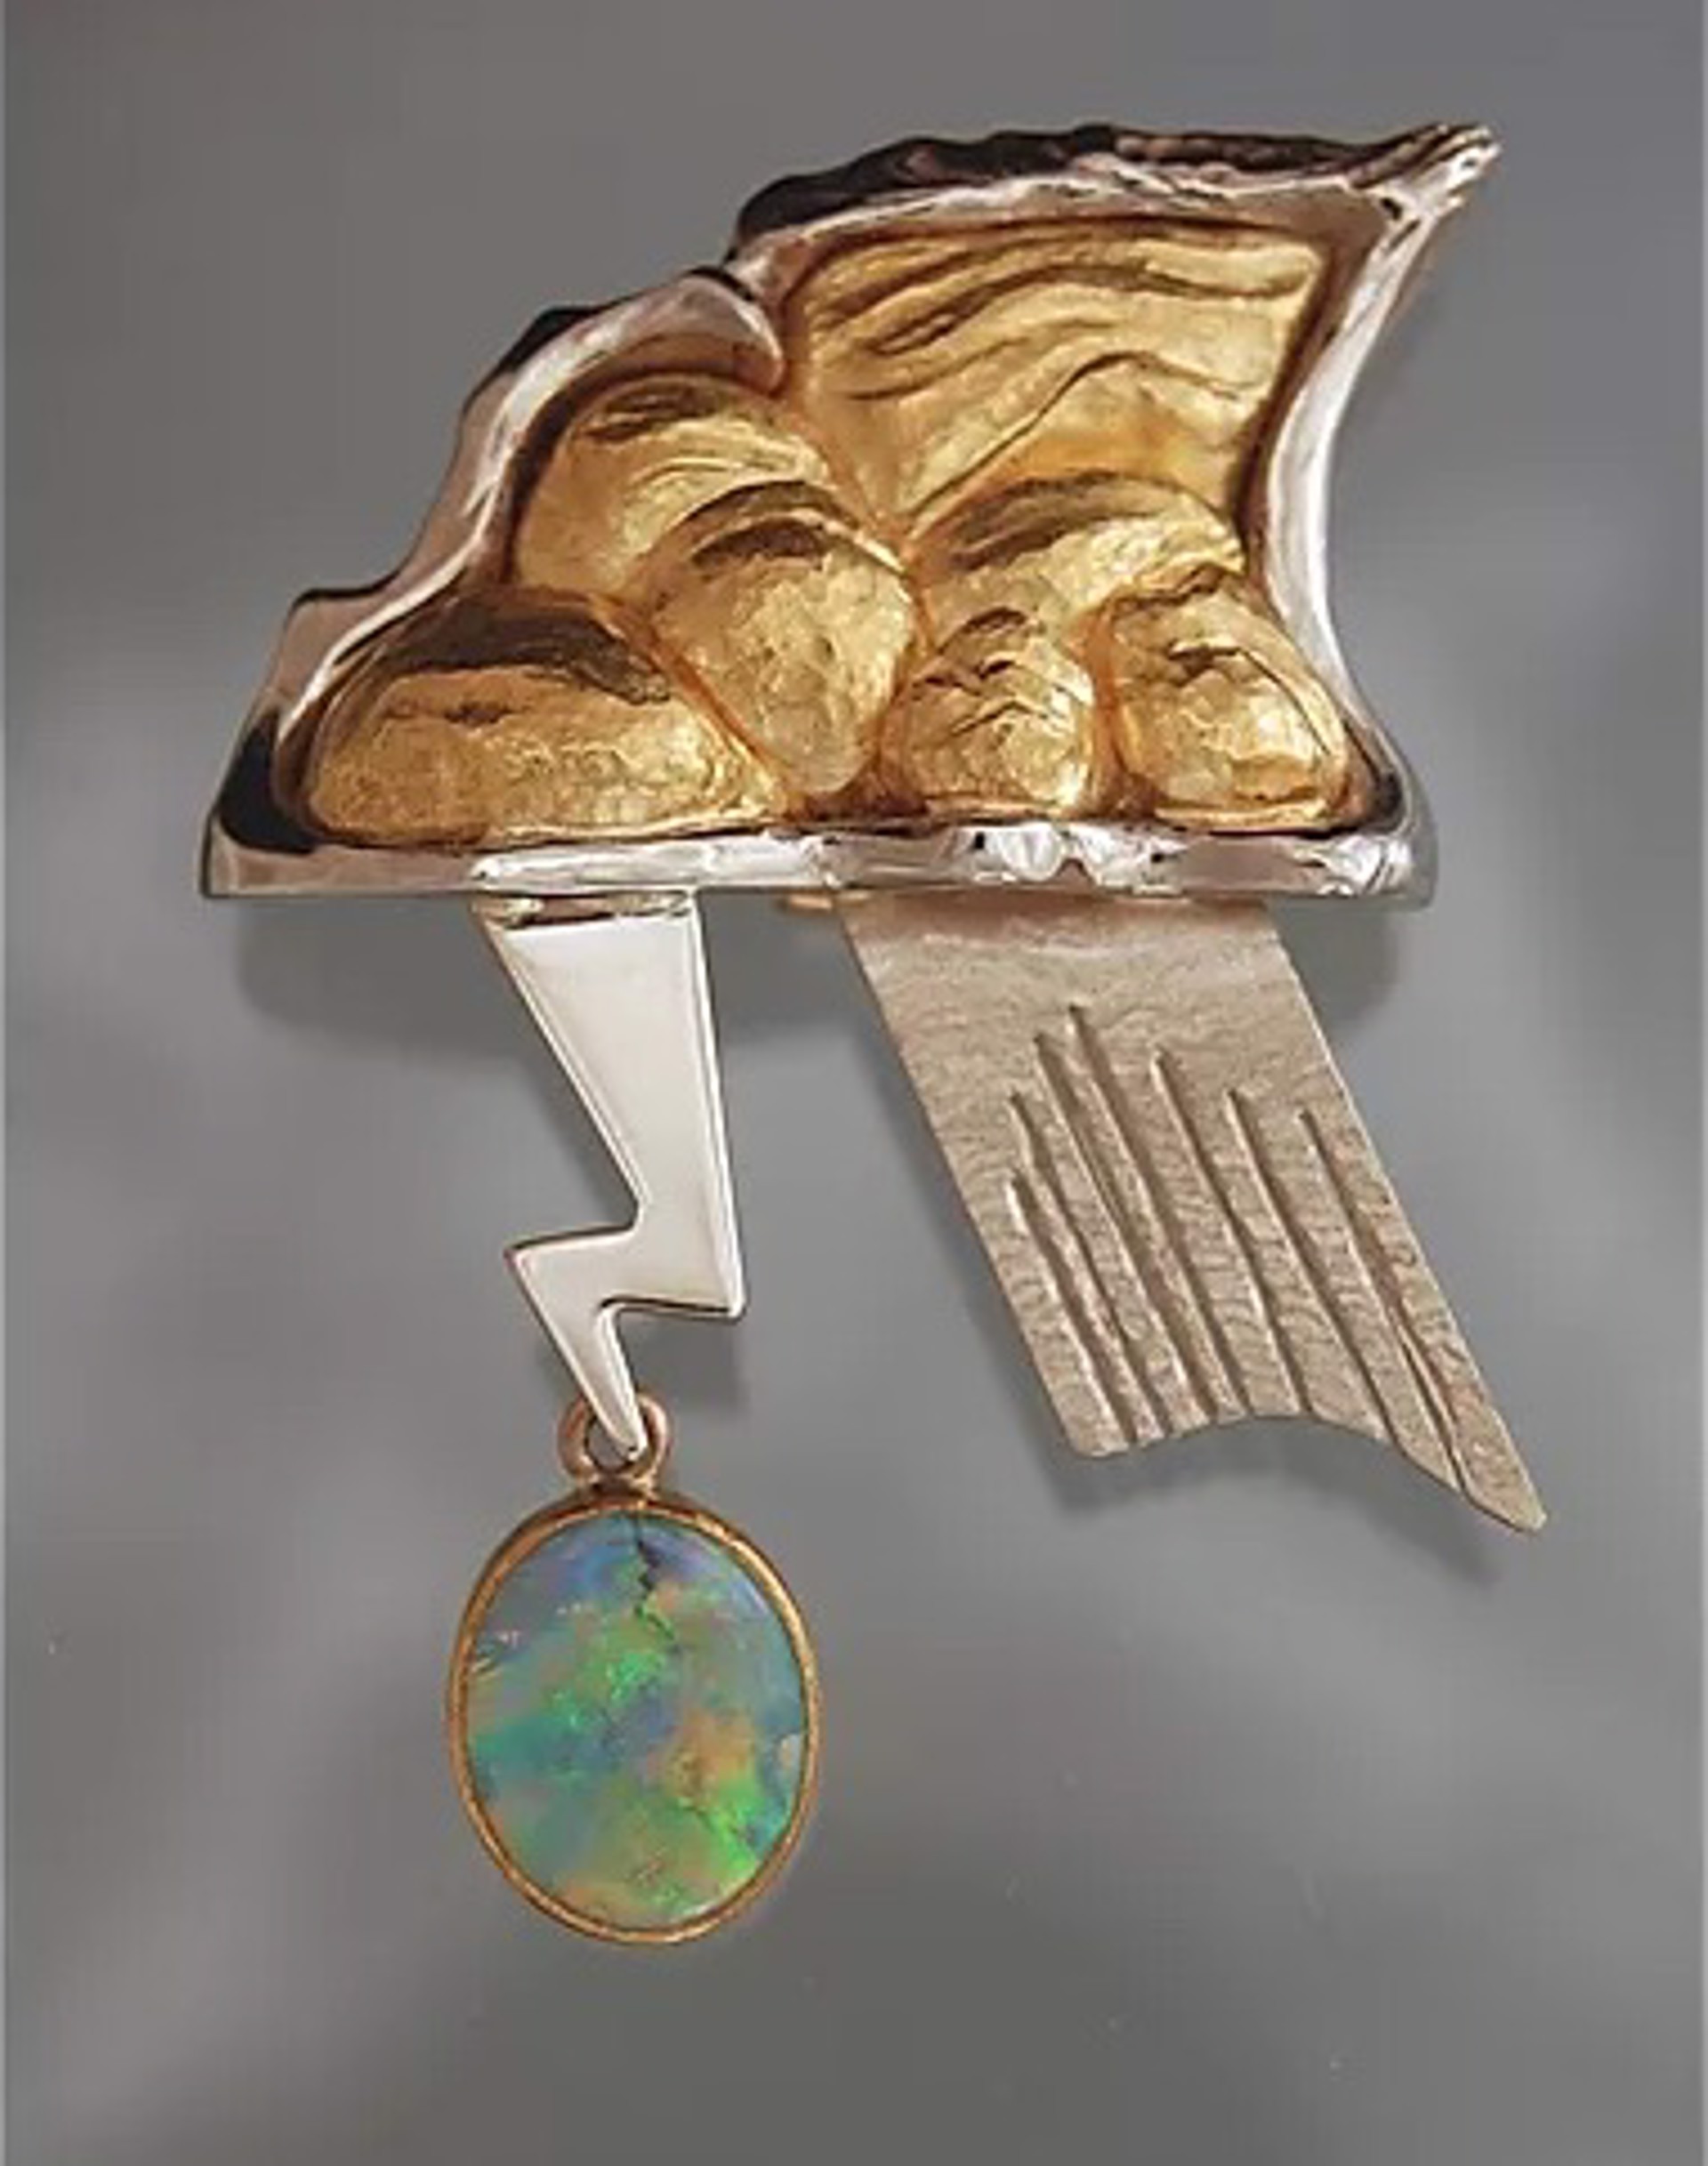 Monsoon Pendant/Pin - Repousse' Panel With 14K & 22K - Natural Australian Black Opals - #011 by Ken and Barbara Newman